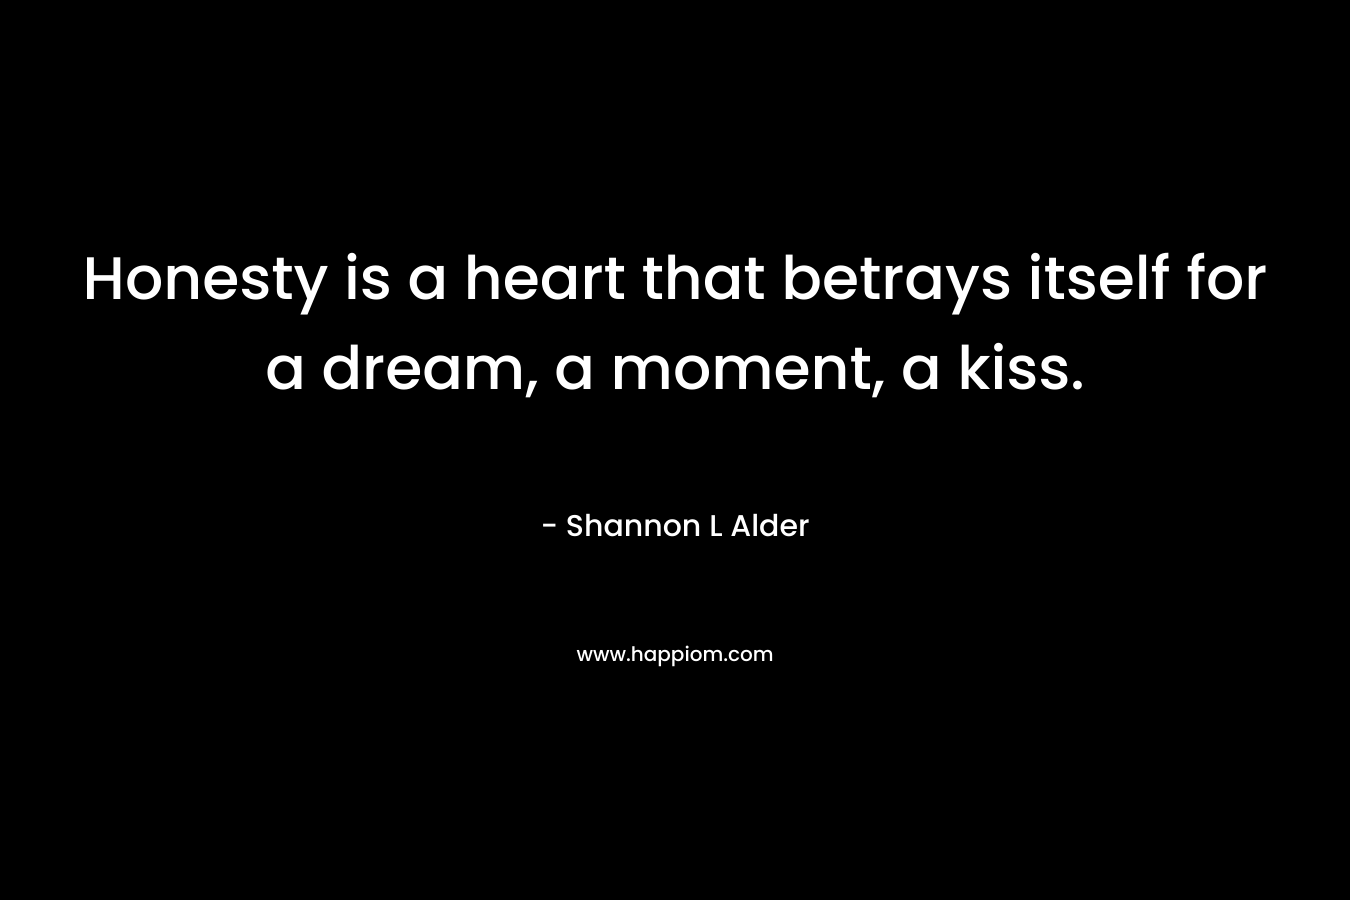 Honesty is a heart that betrays itself for a dream, a moment, a kiss. – Shannon L Alder